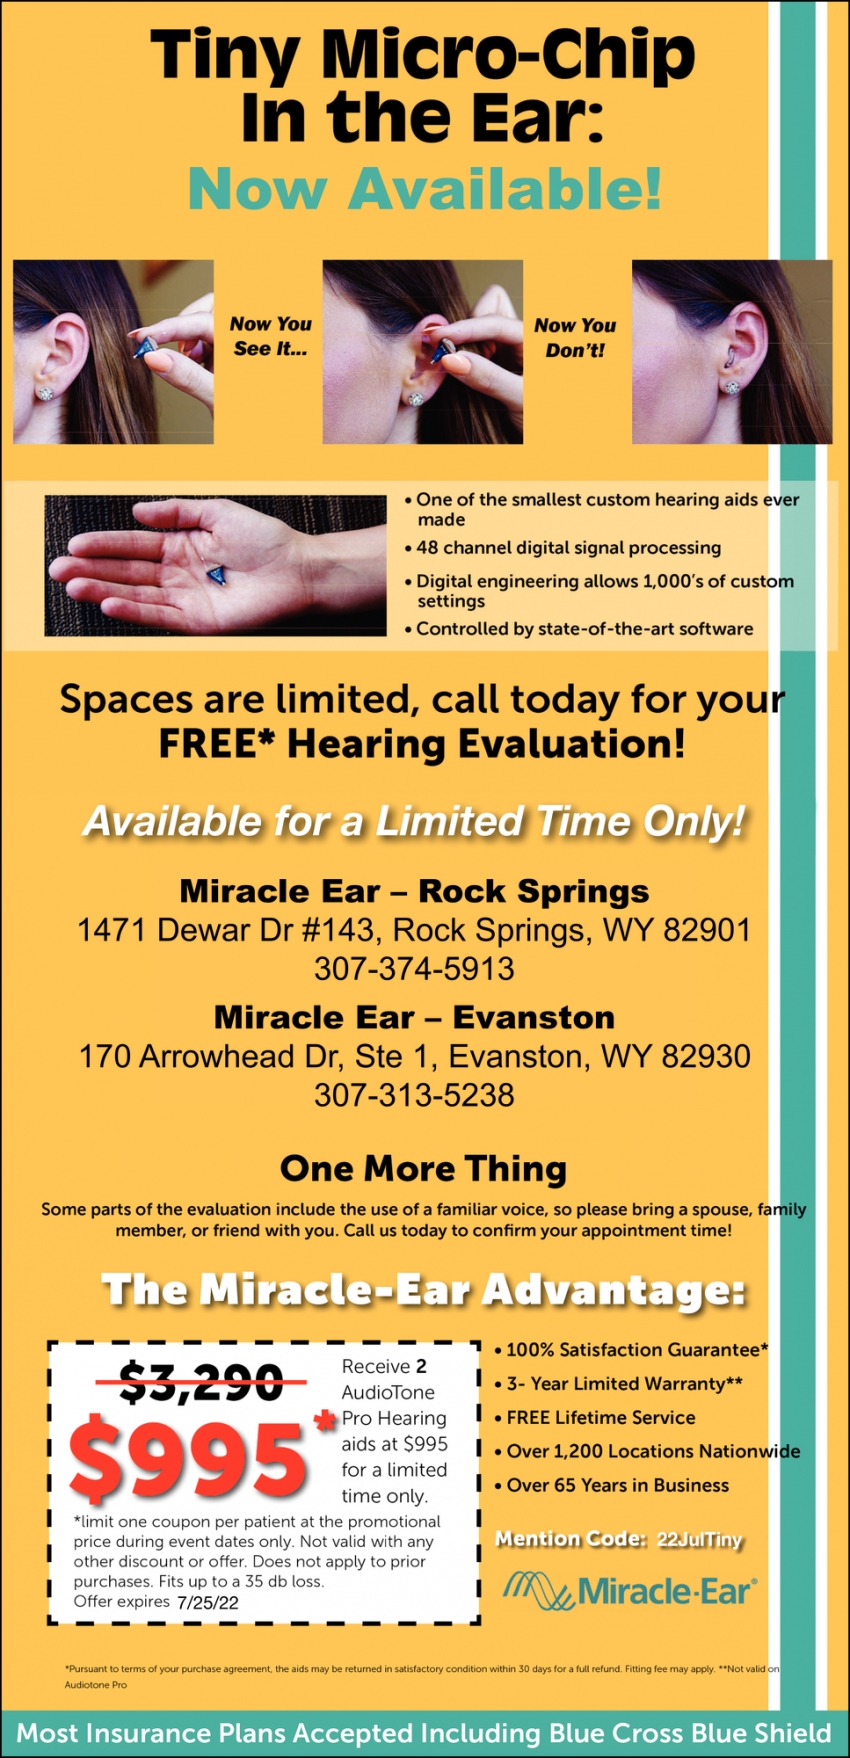 Now Available!, MiracleEar, Rock Springs, WY